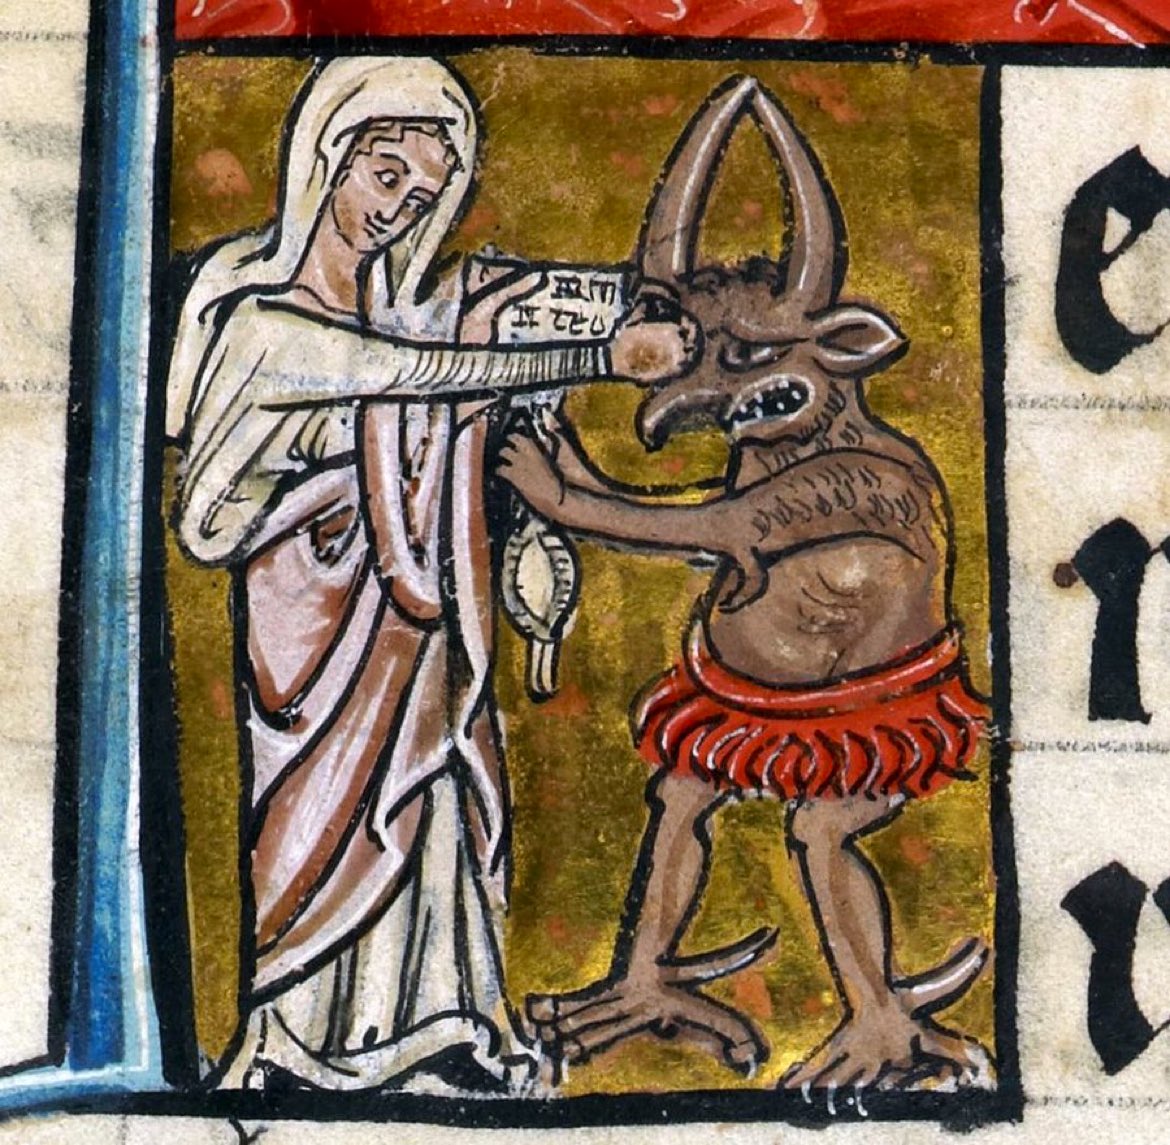 The Virgin Mary punching the Devil in the face, painting from c. 1240.